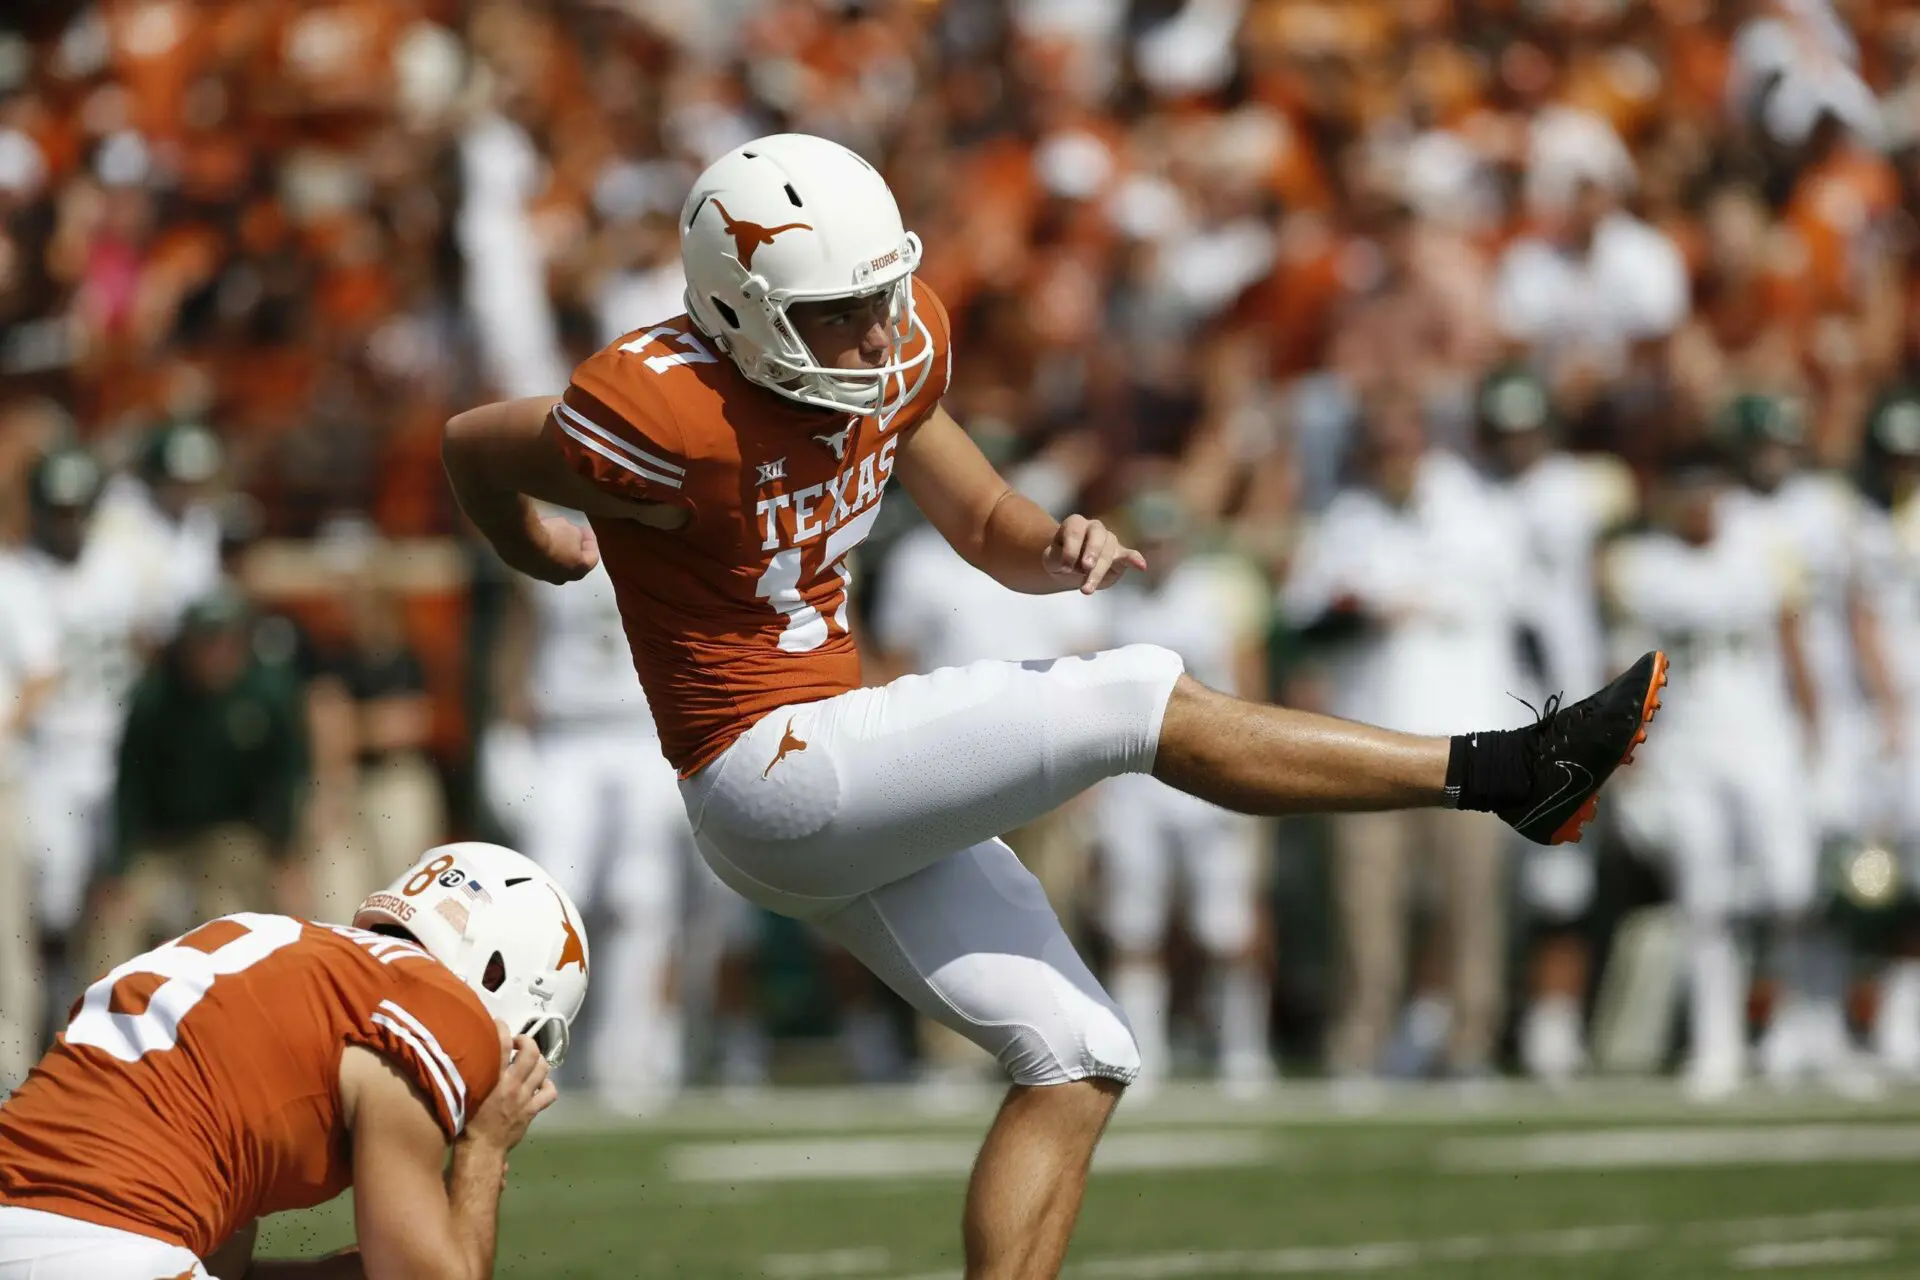 AUSTIN, TX – OCTOBER 13: Cameron Dicker #17 of the Texas Longhorns kicks a field goal in the first half against the Baylor Bears at Darrell K Royal-Texas Memorial Stadium on October 13, 2018 in Austin, Texas. (Photo by Tim Warner/Getty Images)